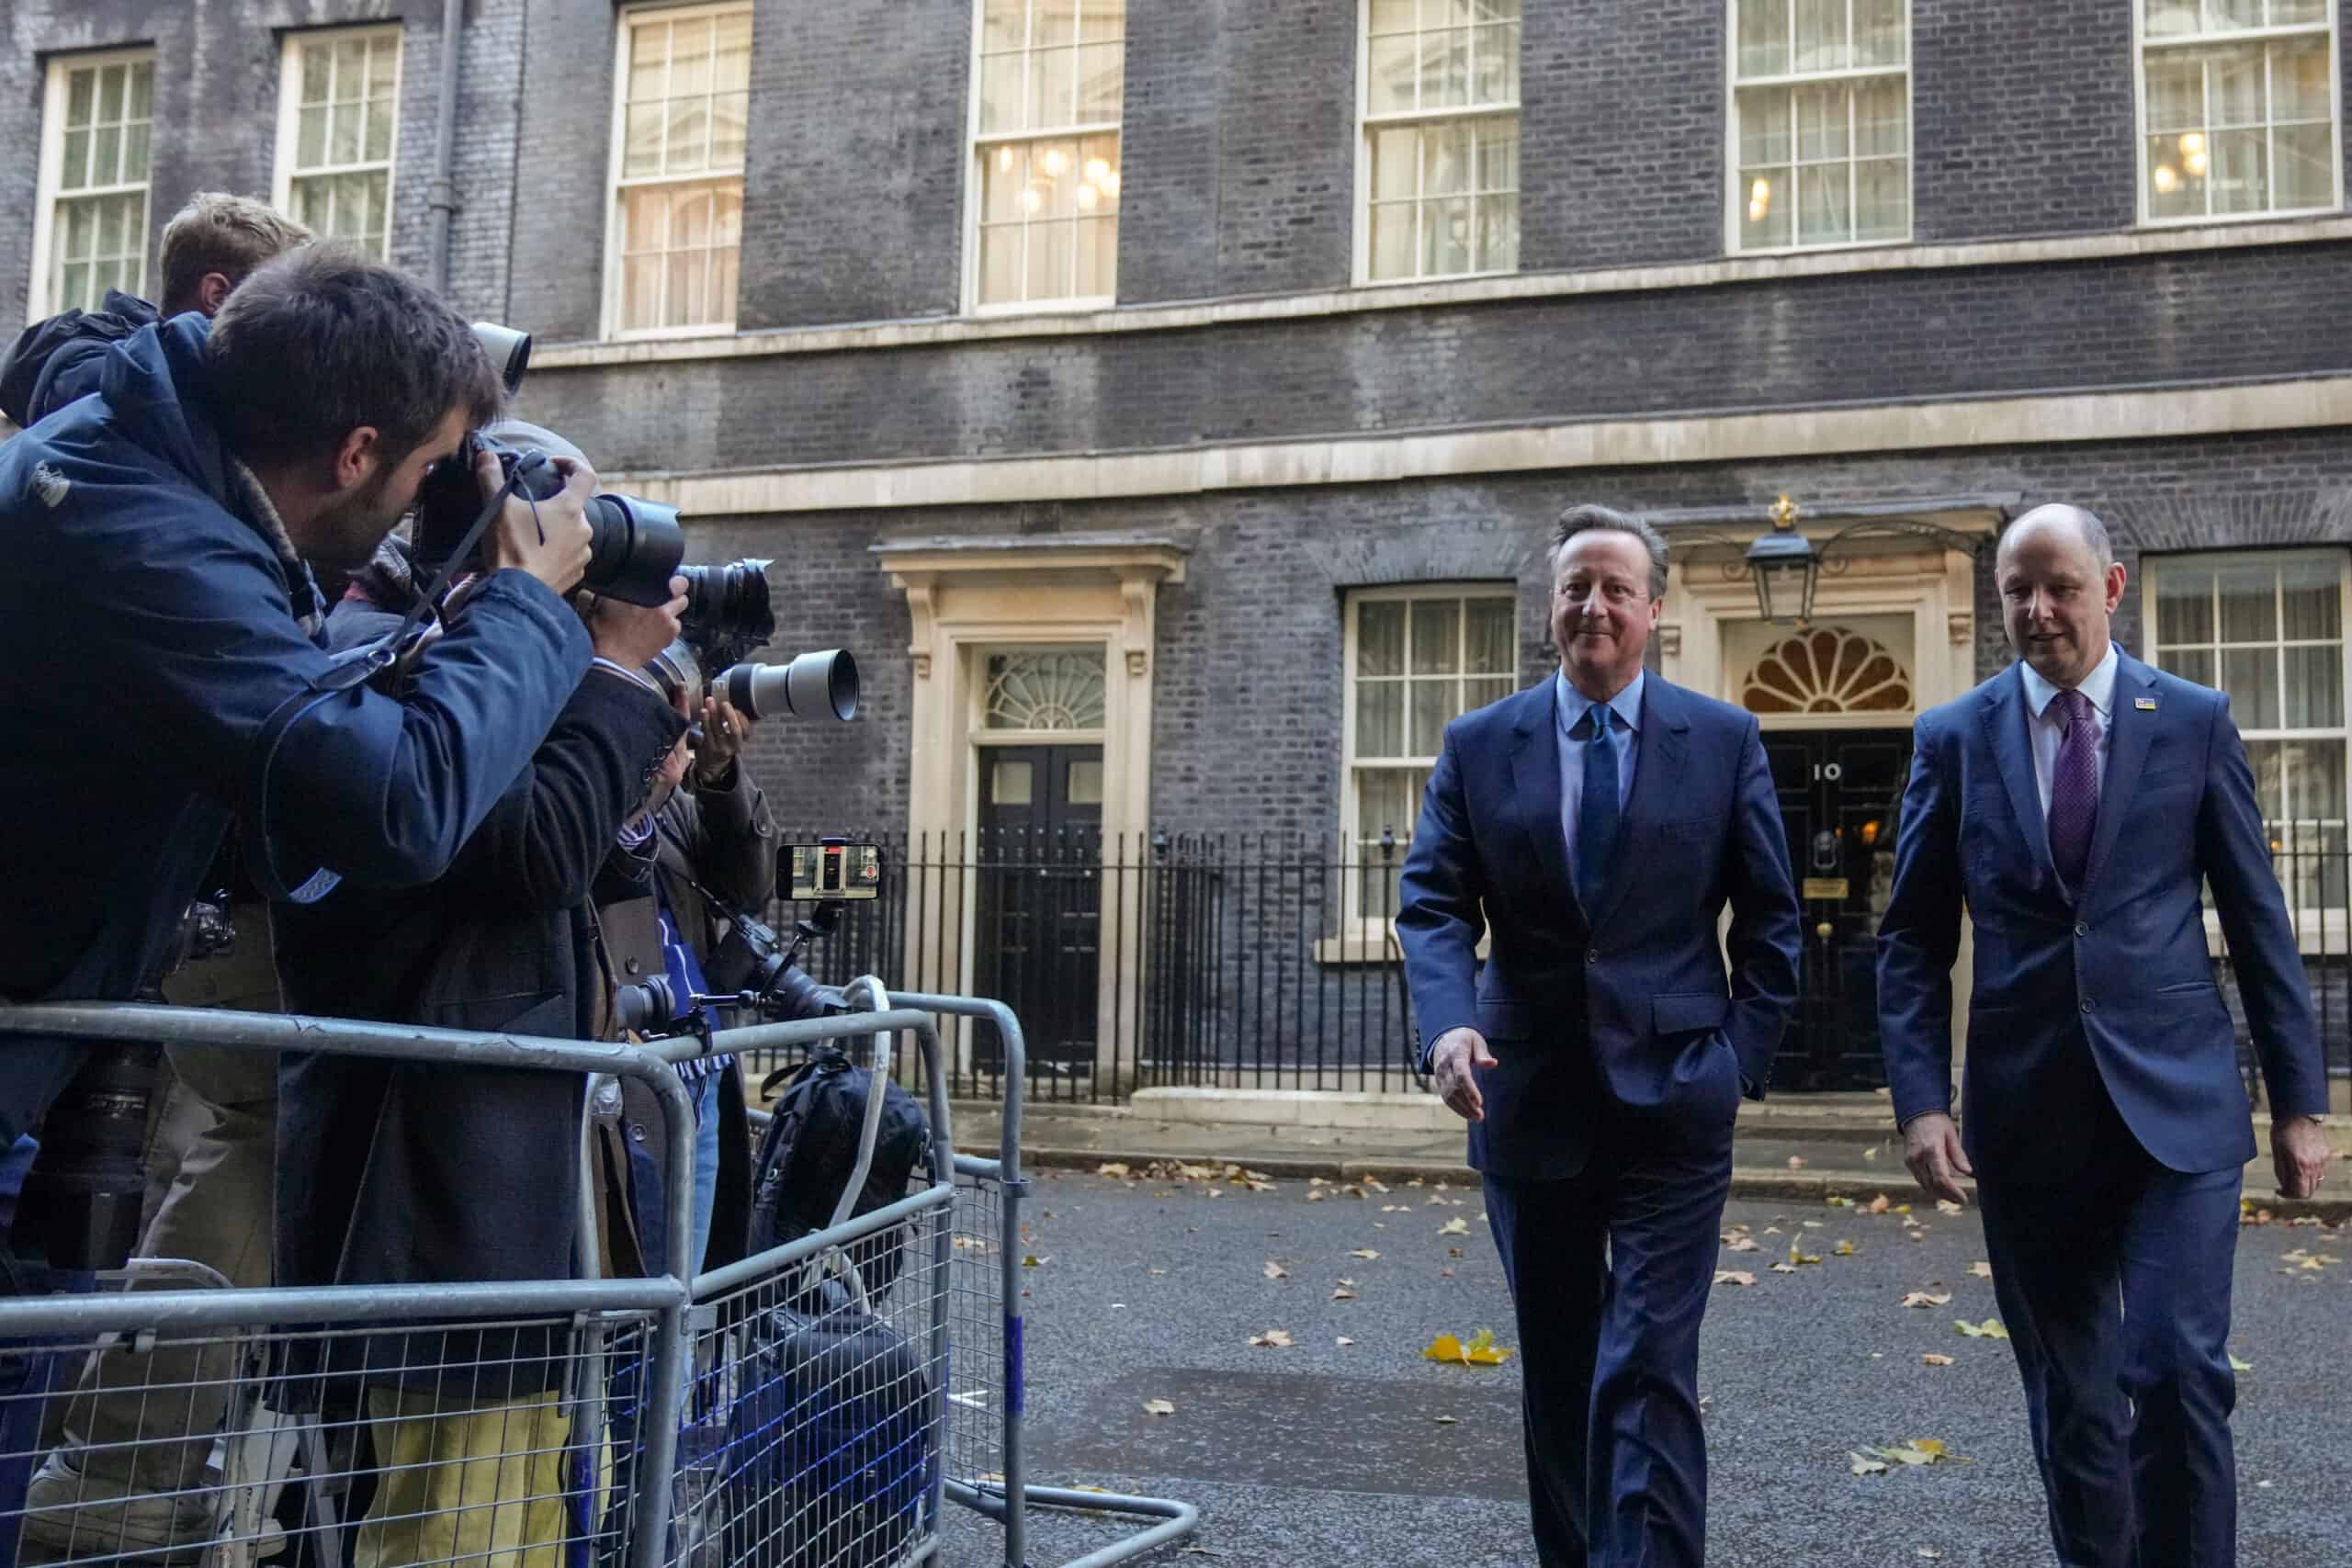 Cameron to avoid regular questioning by MPs as Foreign Secretary